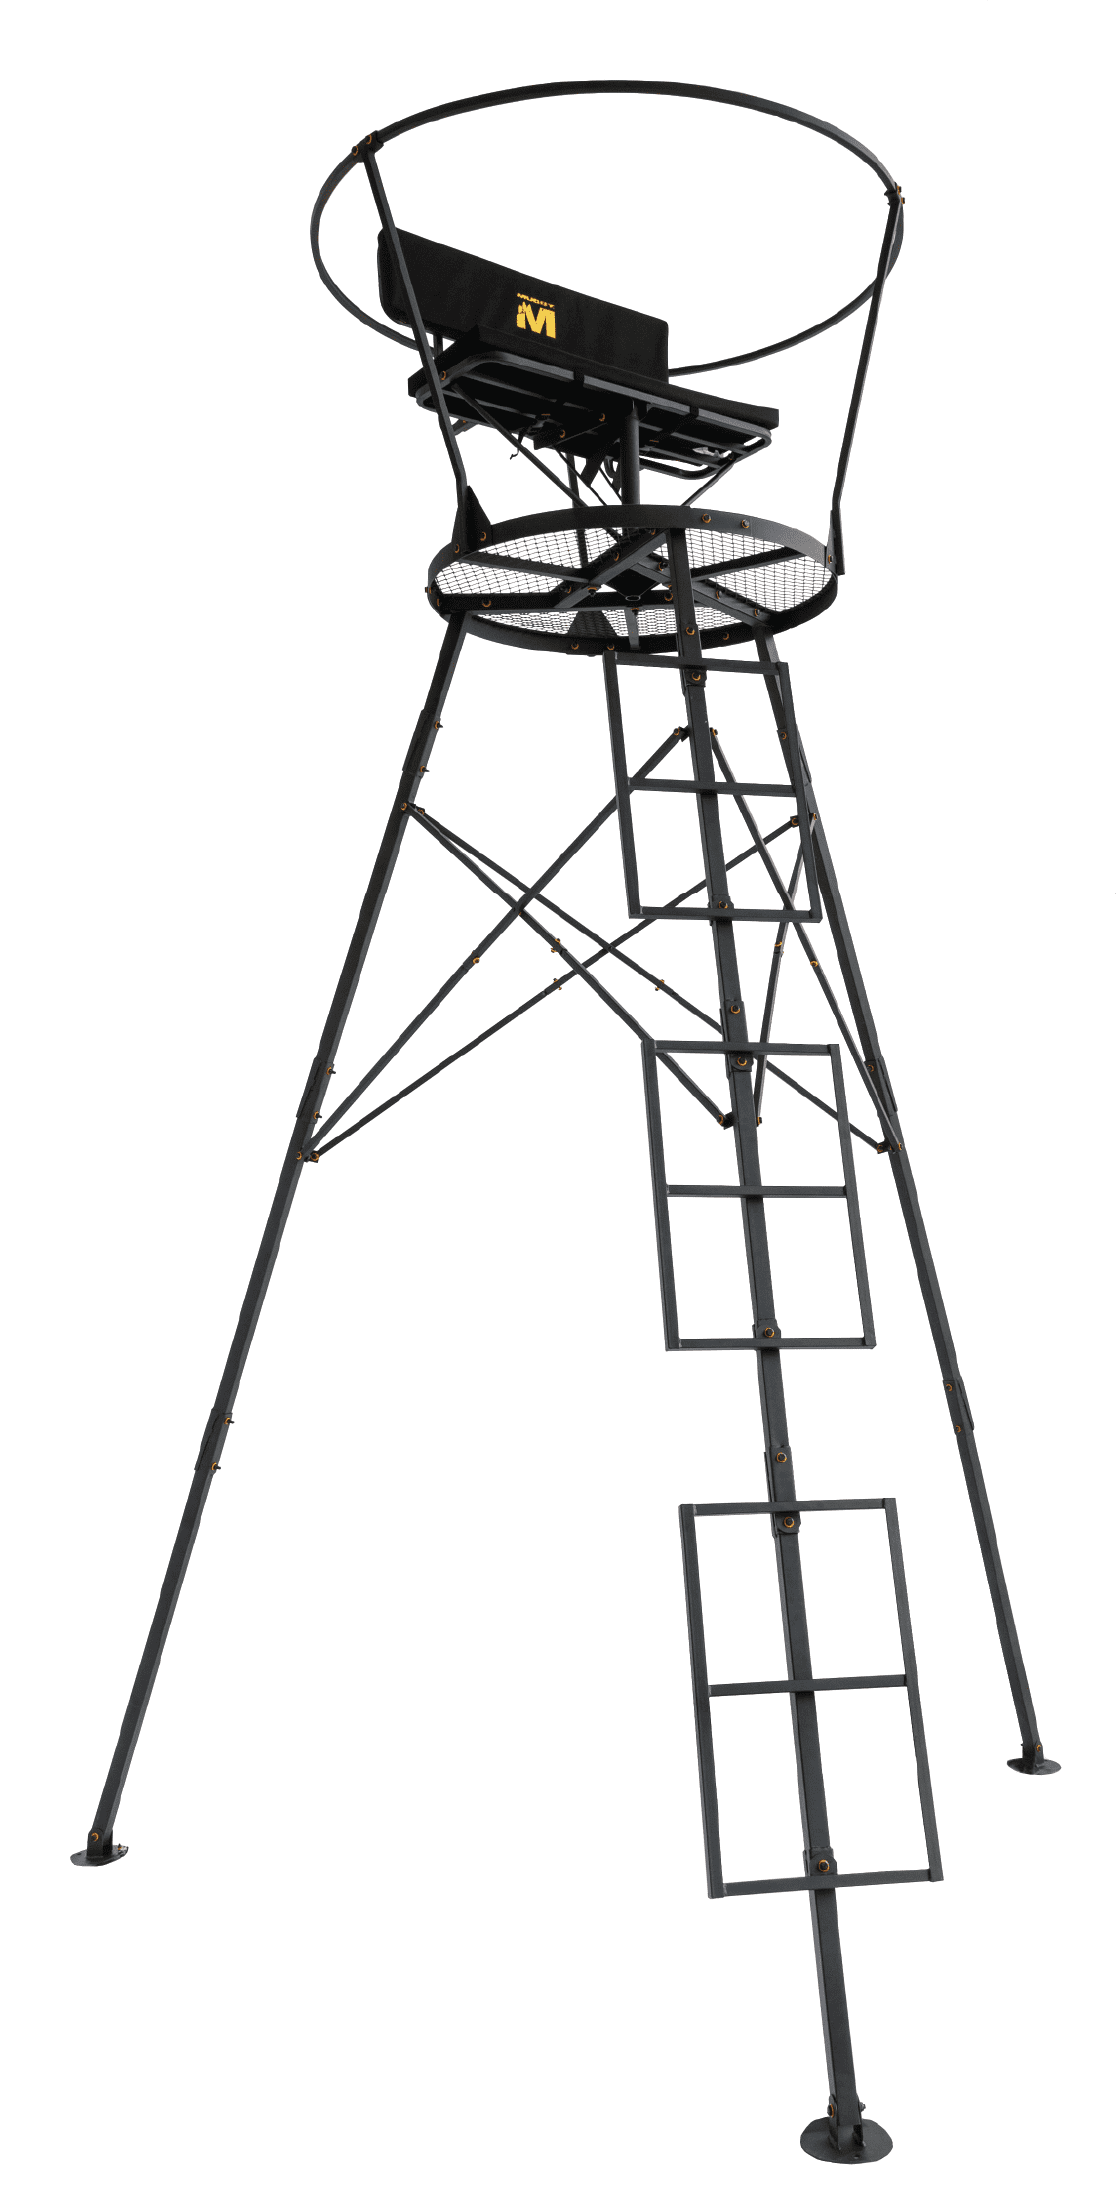 Muddy Outdoors 12.4' Two-Man Hunting Tripod Tree Stand